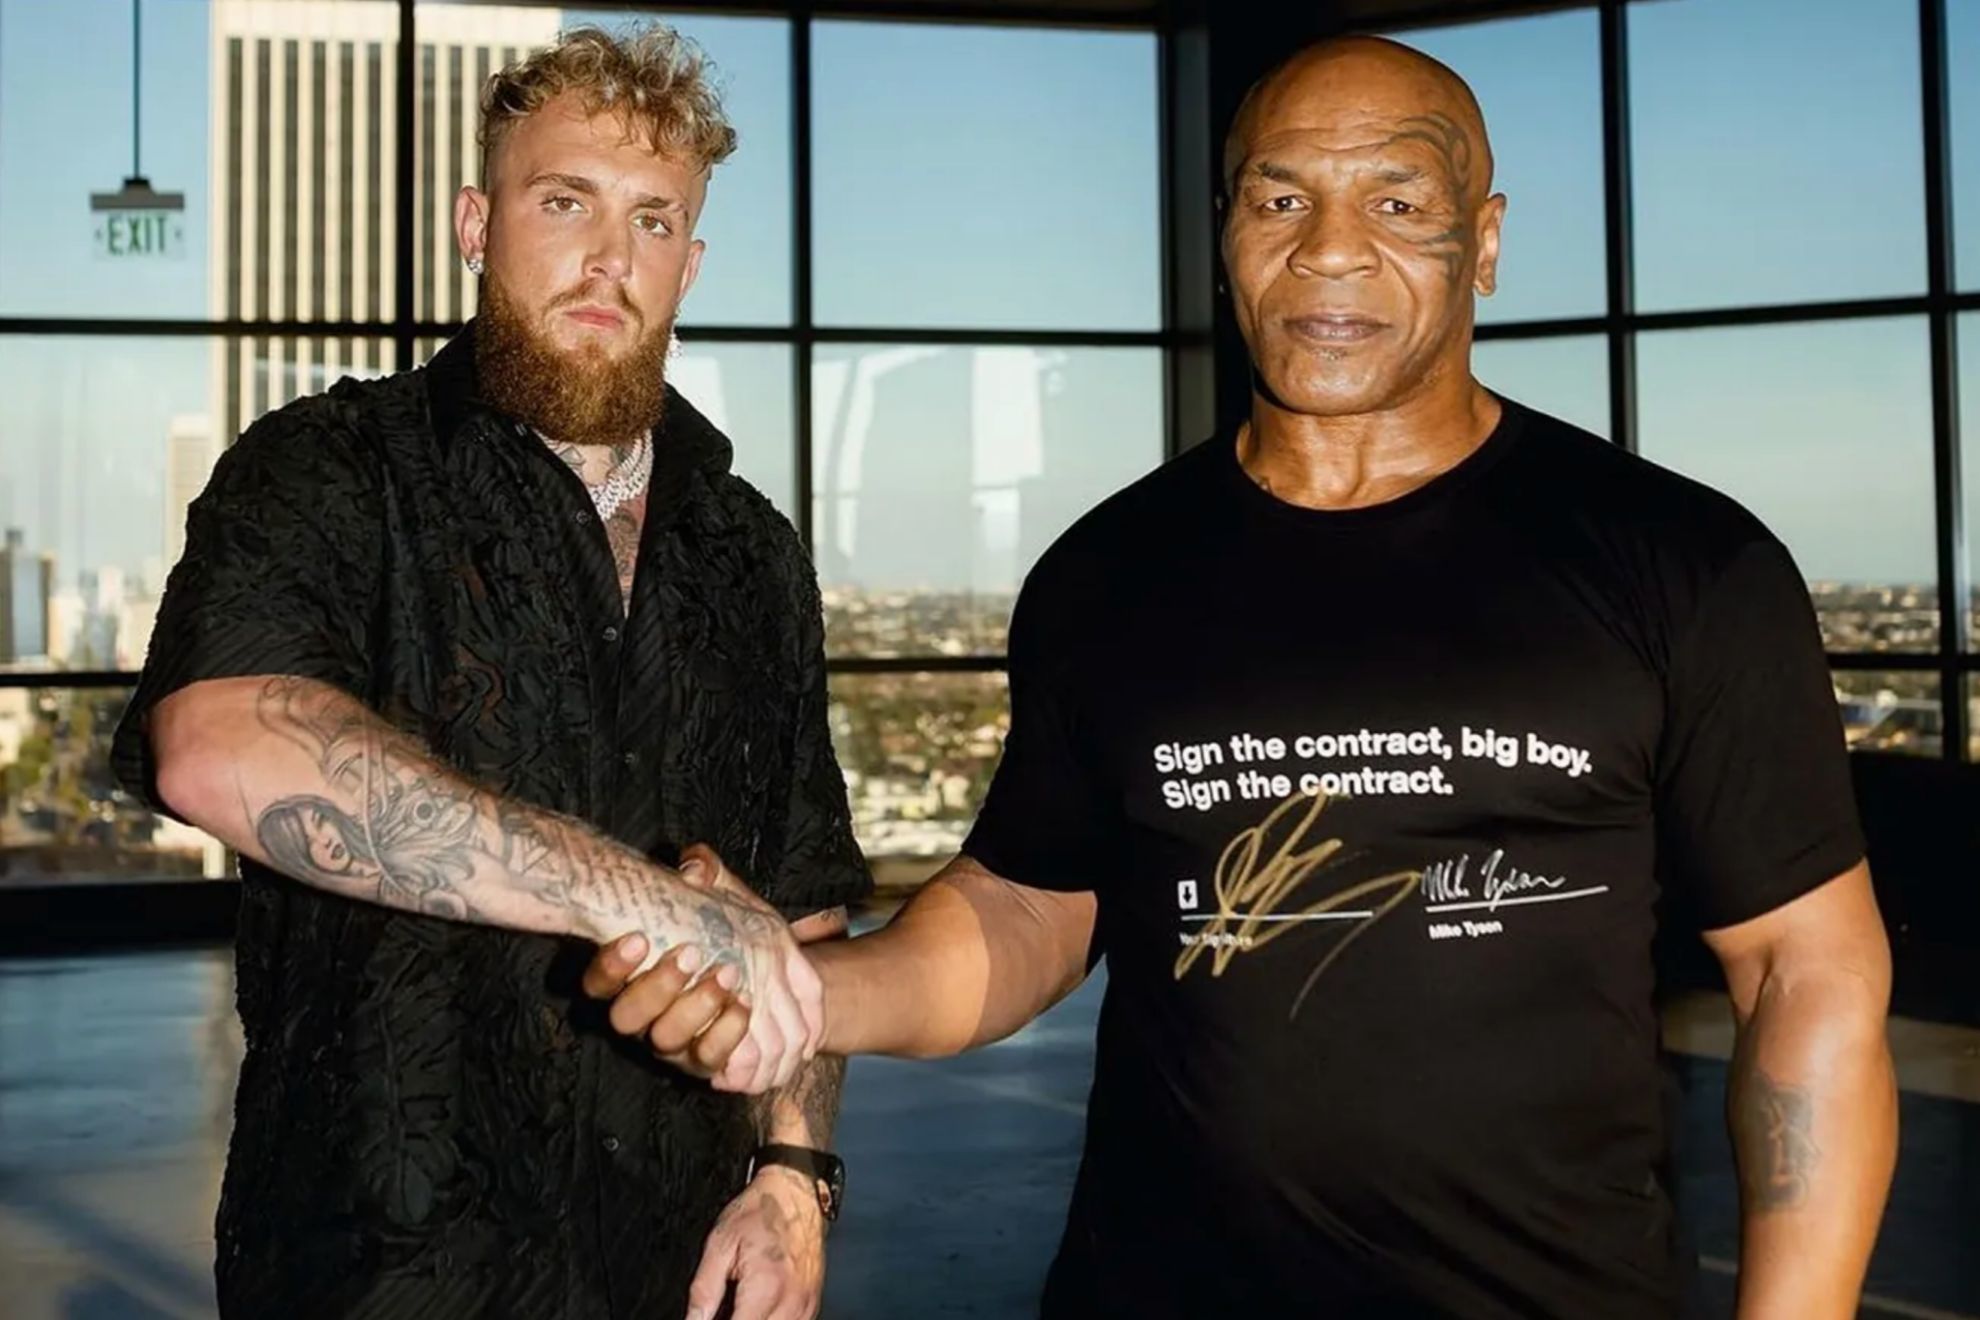 Does Mike Tyson have any trepidation about Jake Paul fight?